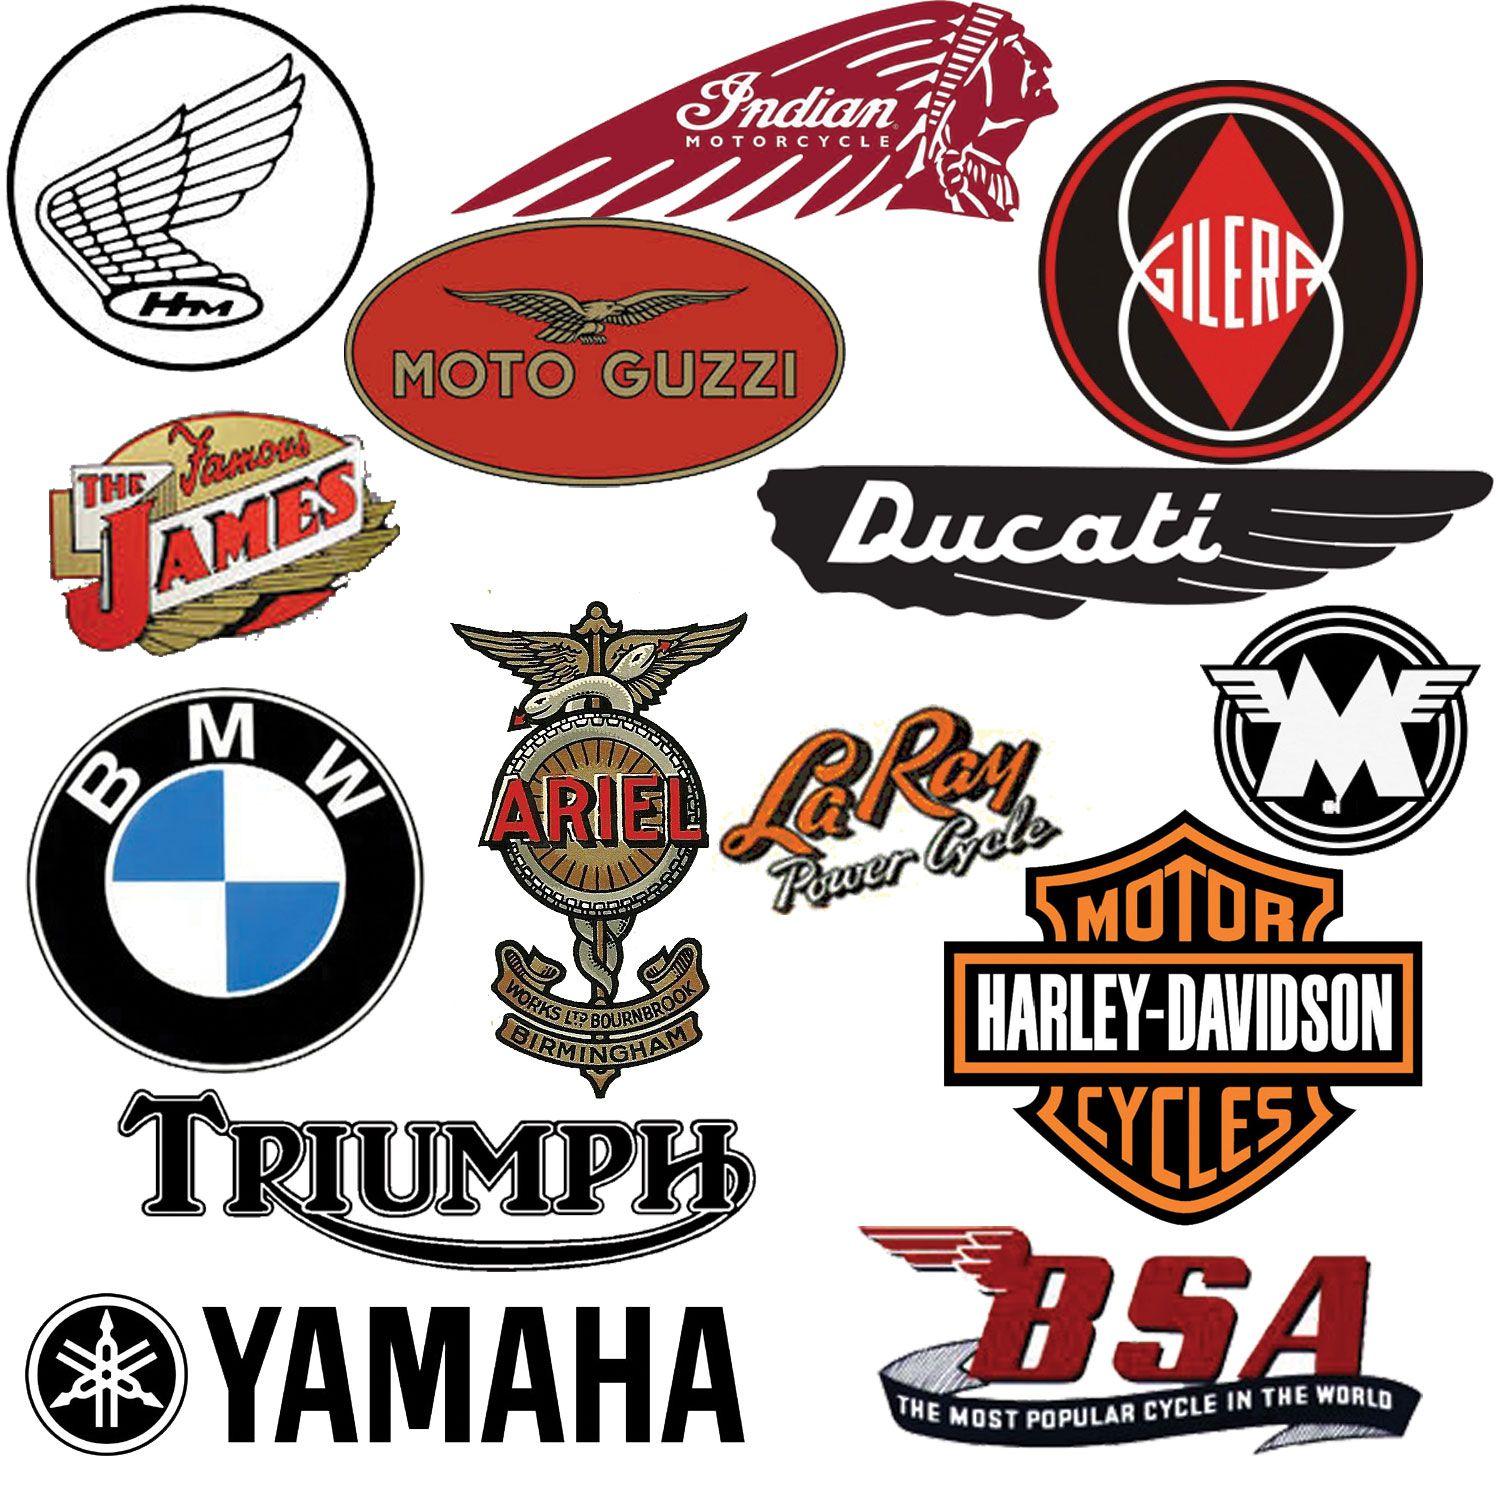 Vintage Motorcycle Logo - RelicMoto Vintage Motorcycle Show: August 2015